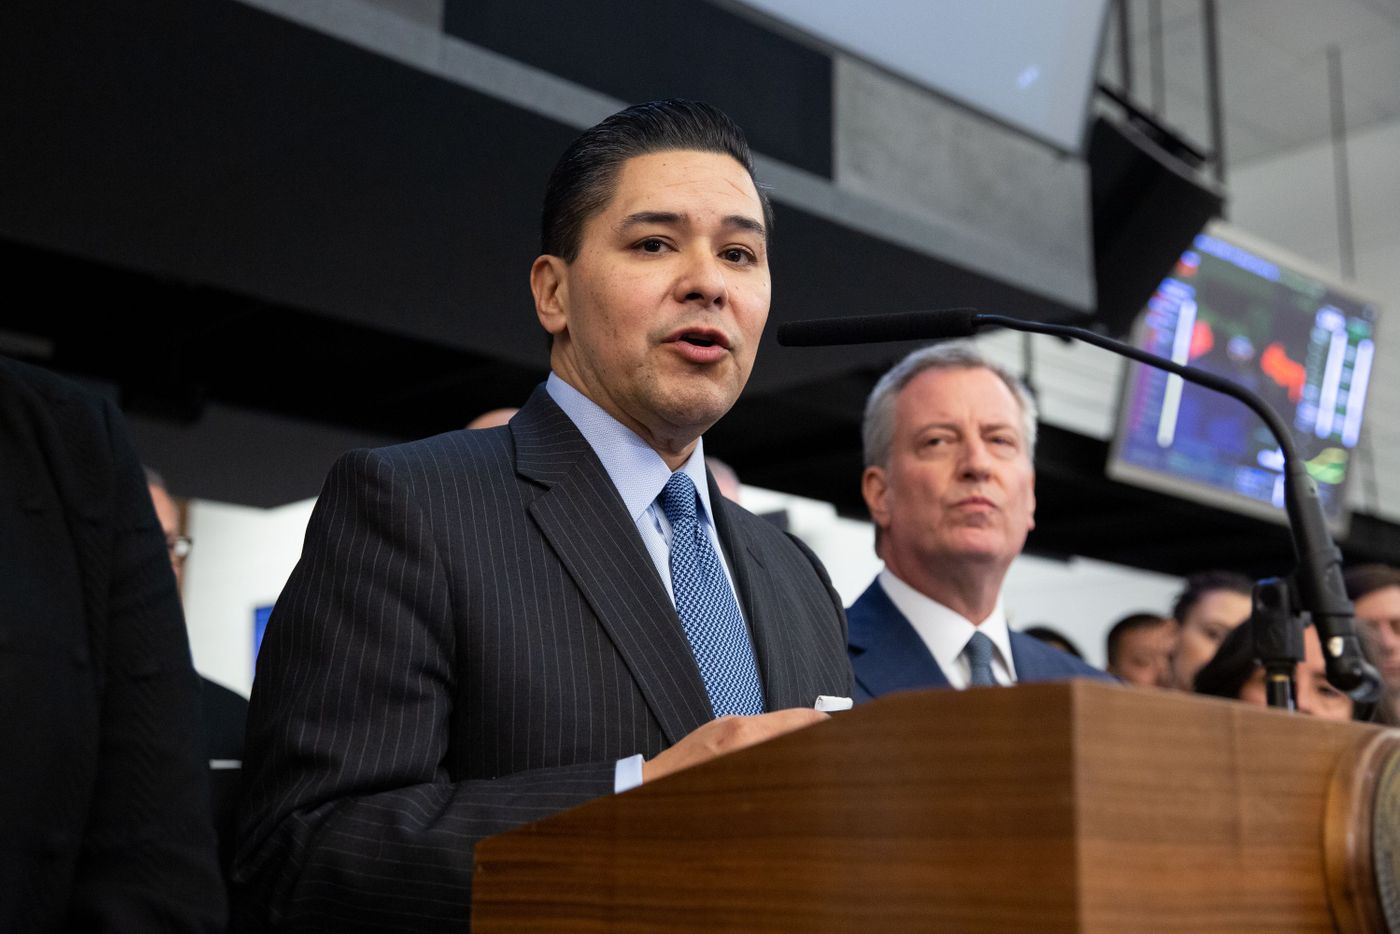 Schools Chancellor Richard Carranza speaks at a news conference at the Office of Emergency Management about the Coronavirus, March 2, 2020.